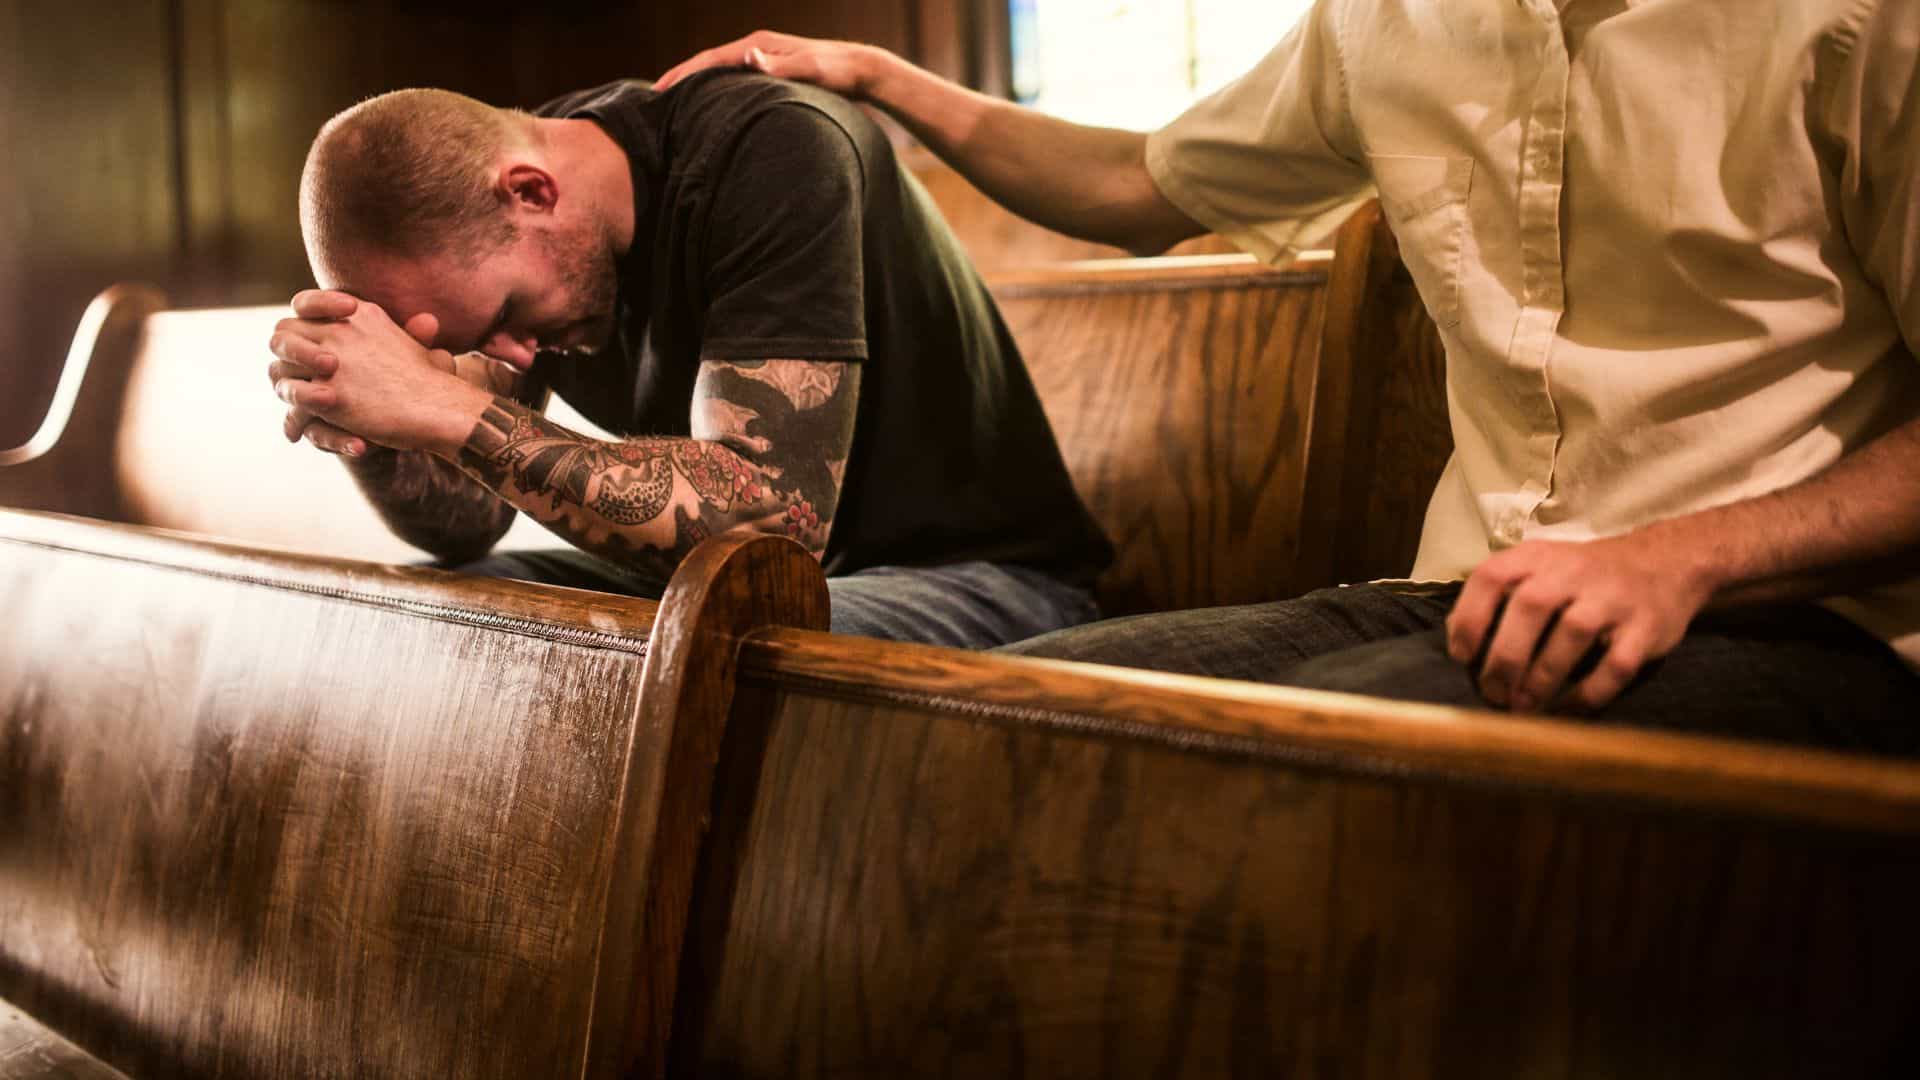 Sexual Abuse: How the Church Should Respond